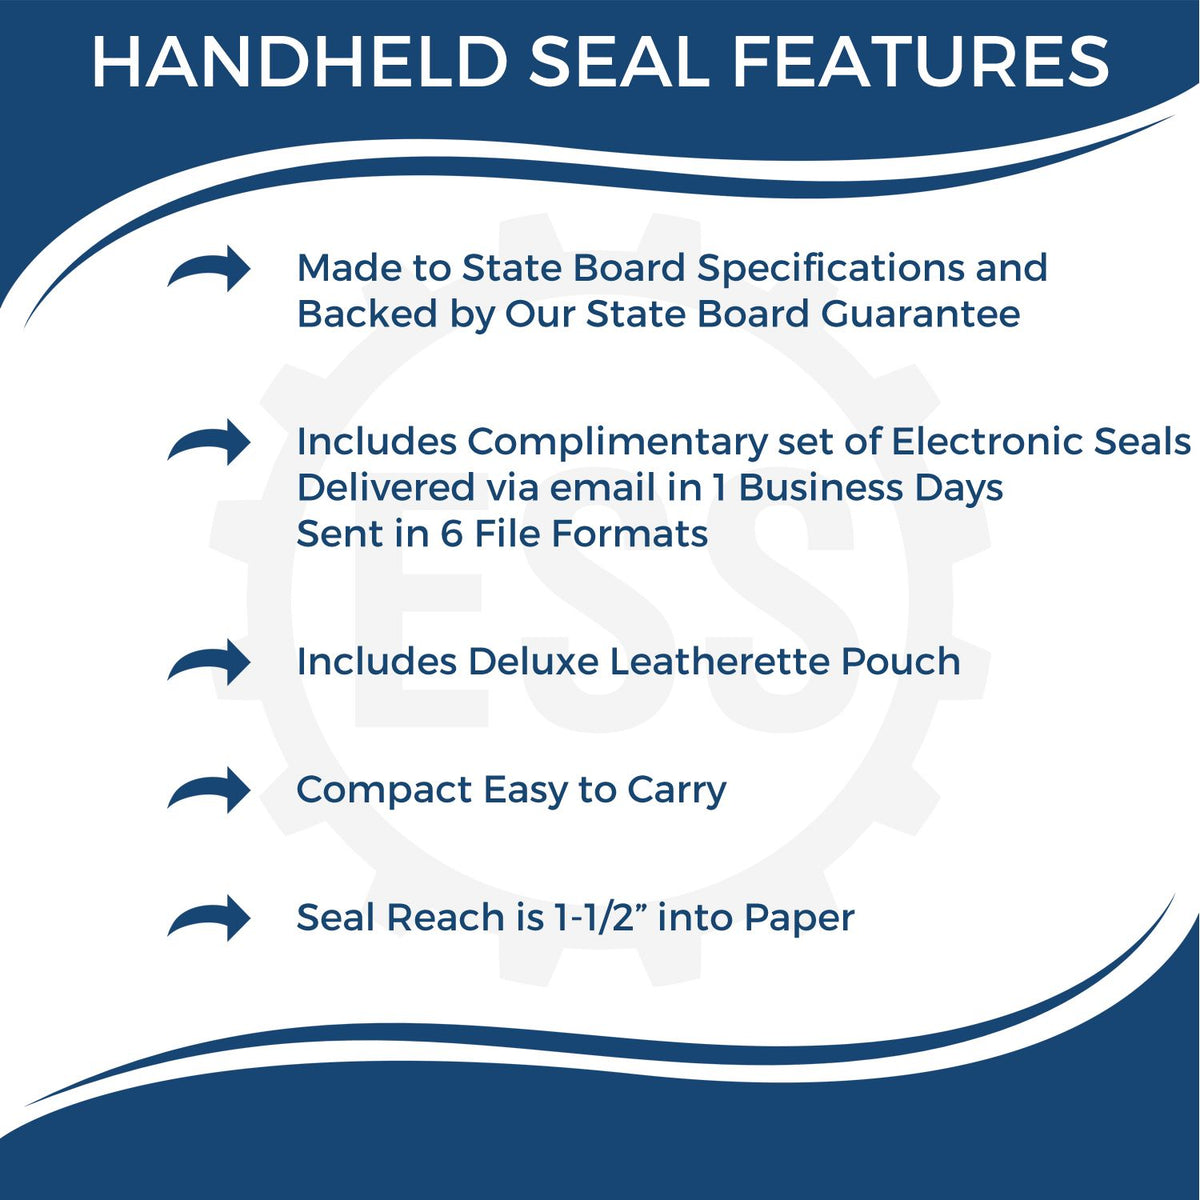 A picture of an infographic highlighting the selling points for the Handheld Arizona Land Surveyor Seal